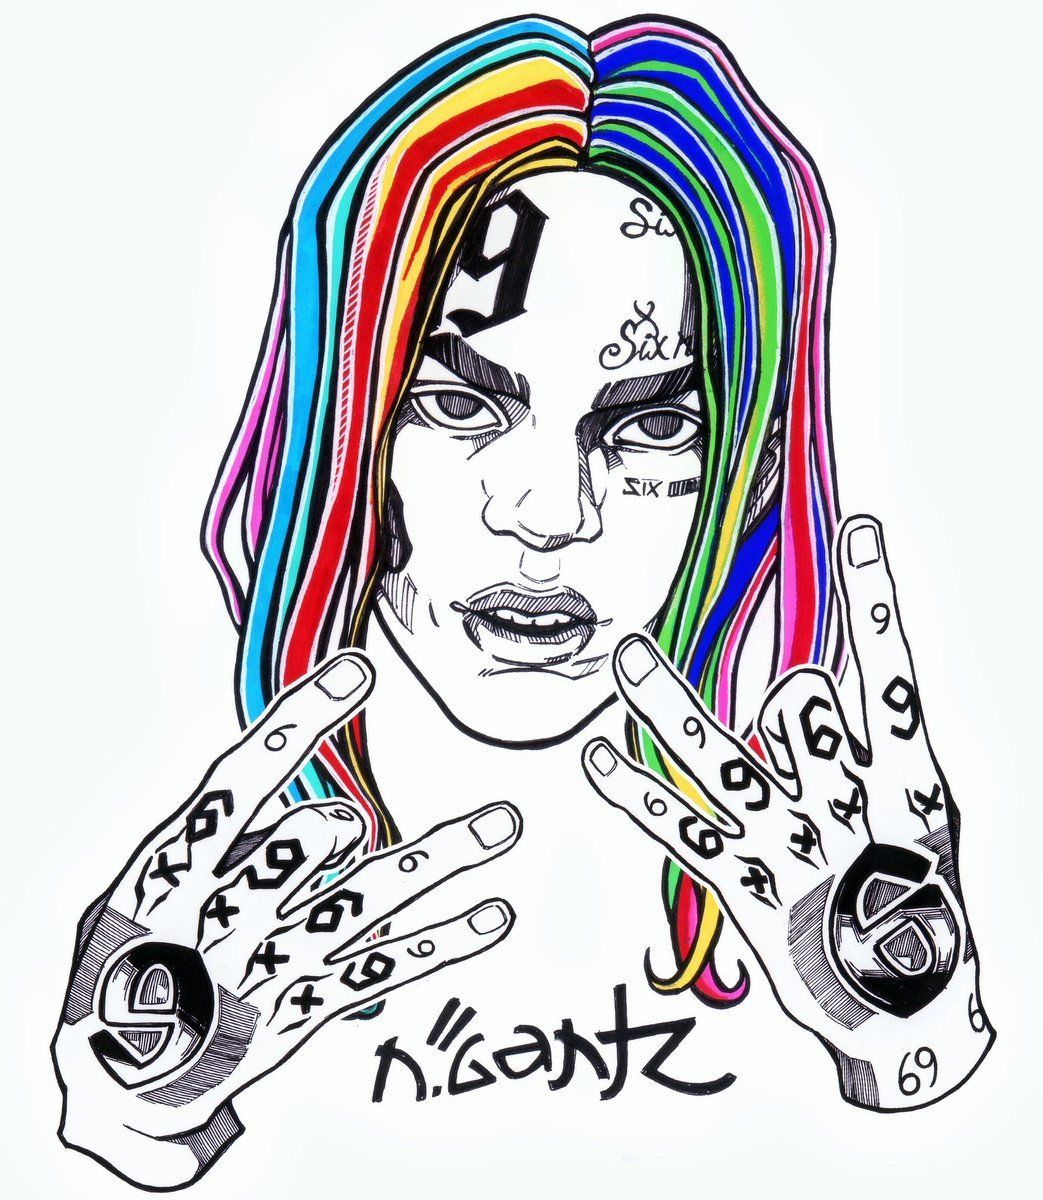 6ix9ine Cartoon Wallpapers posted by Zoey Cunningham.